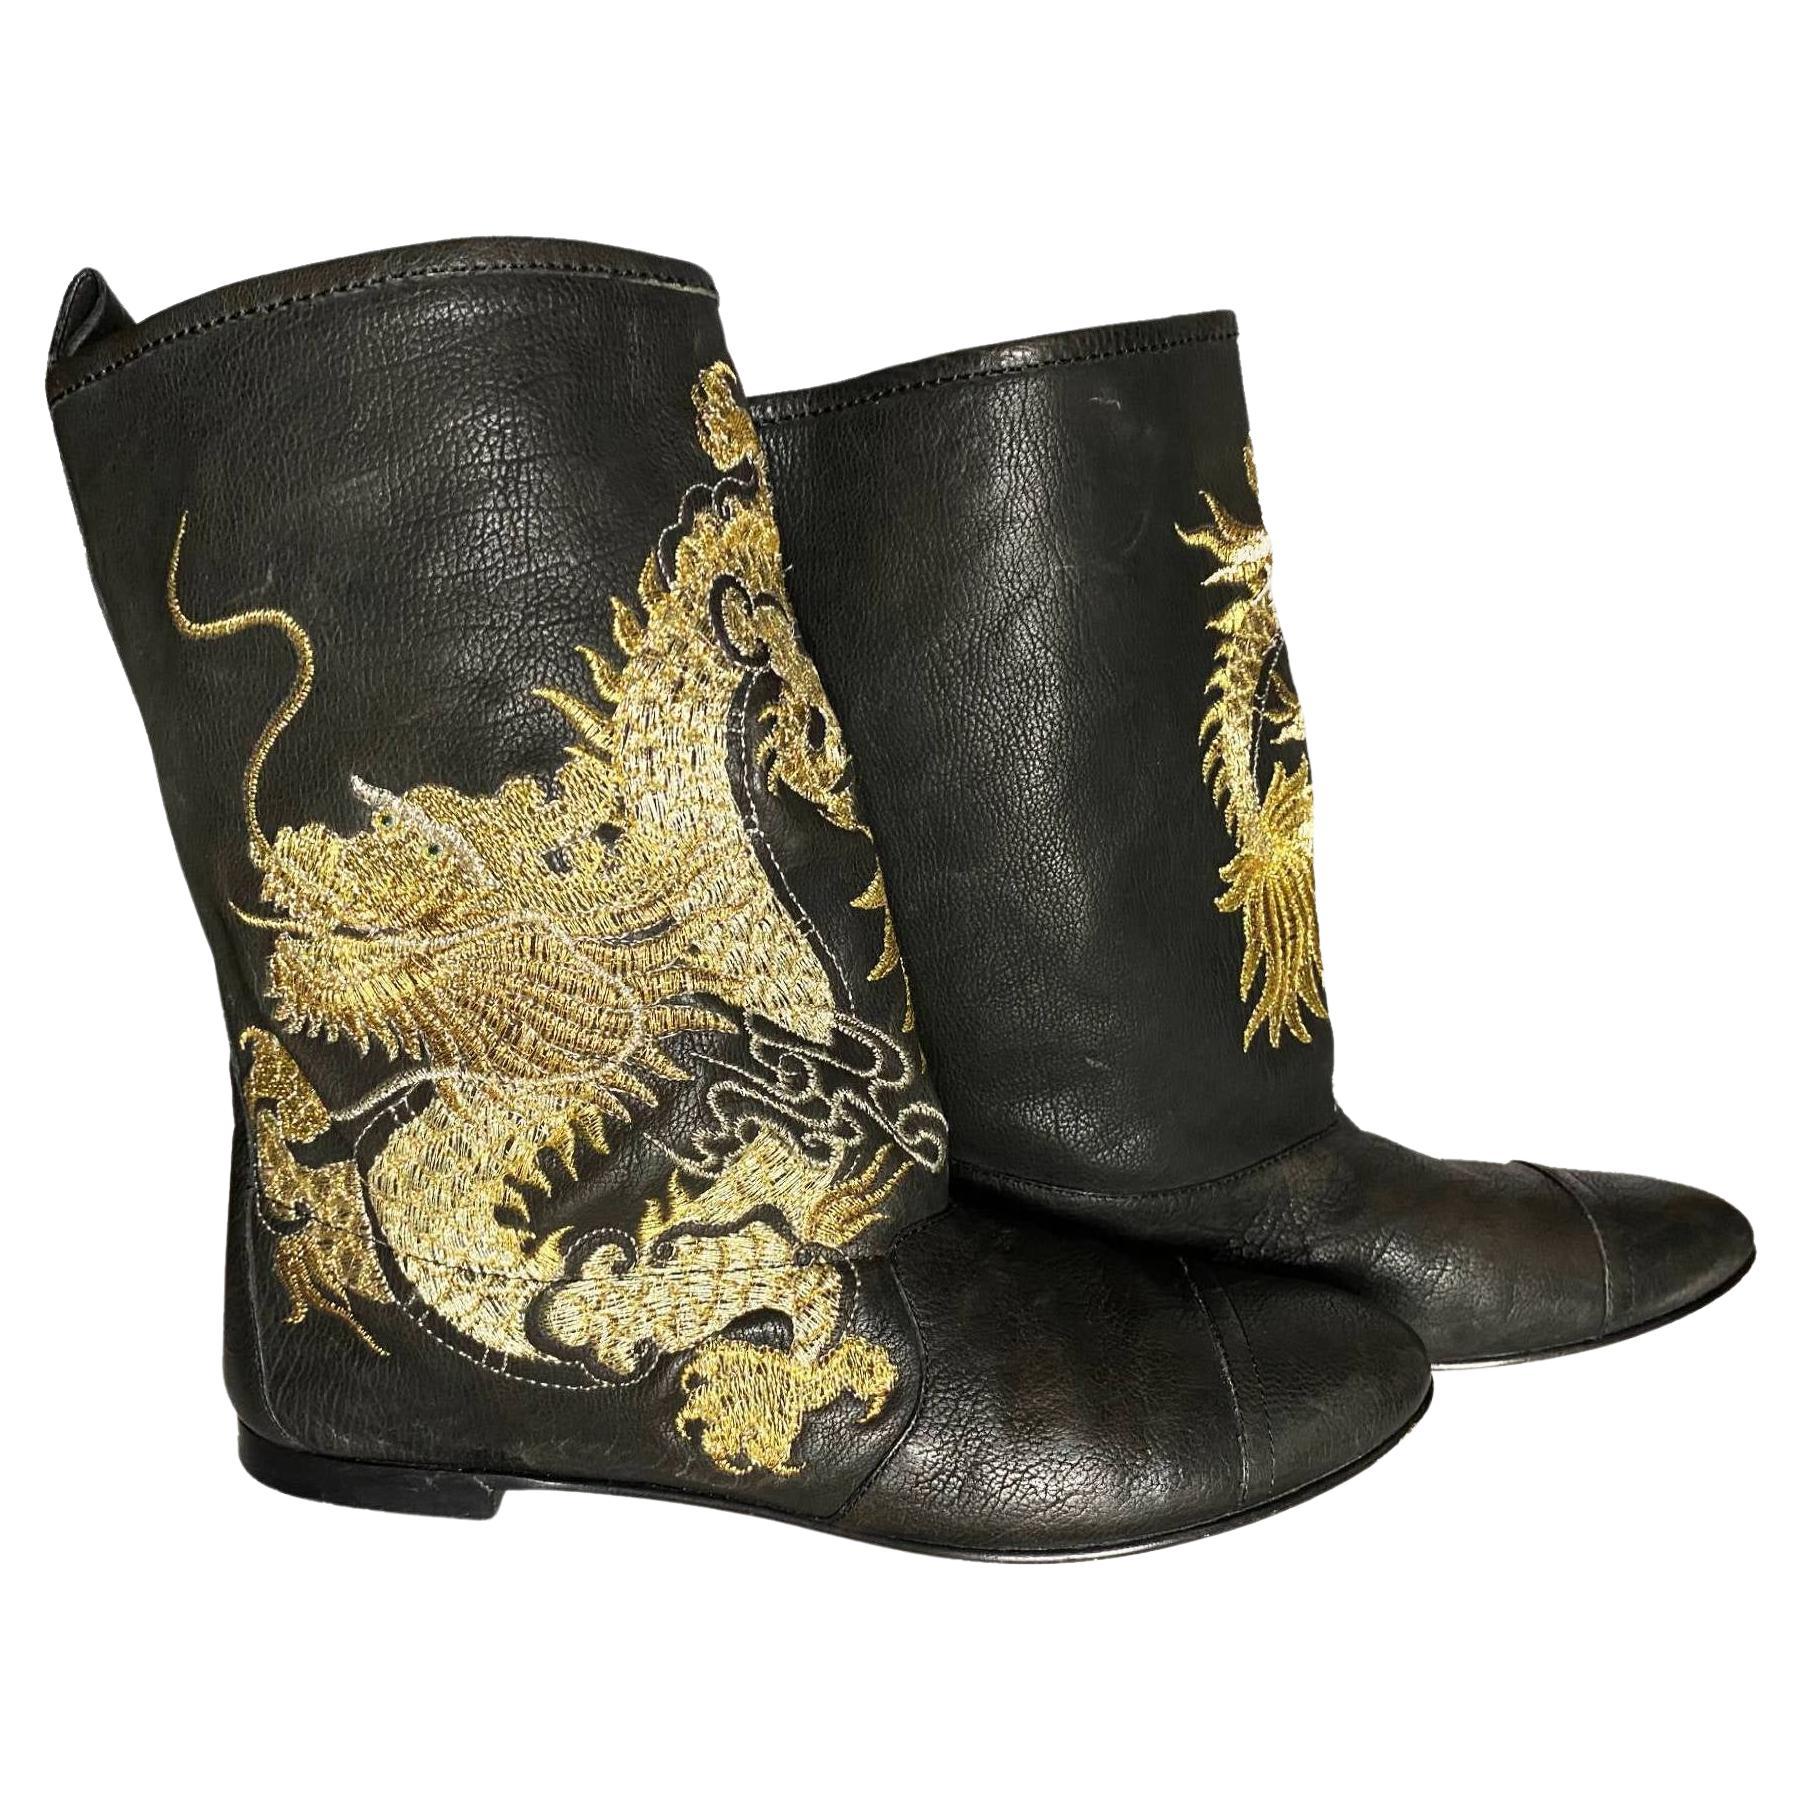 Flat boots in black leather featuring an embroidered multicolor dragon on front, Made in Italy  The combination of leather construction, expert craftsmanship and unique design make these boots a durable and stylish choice.

Condition: 2000s, very